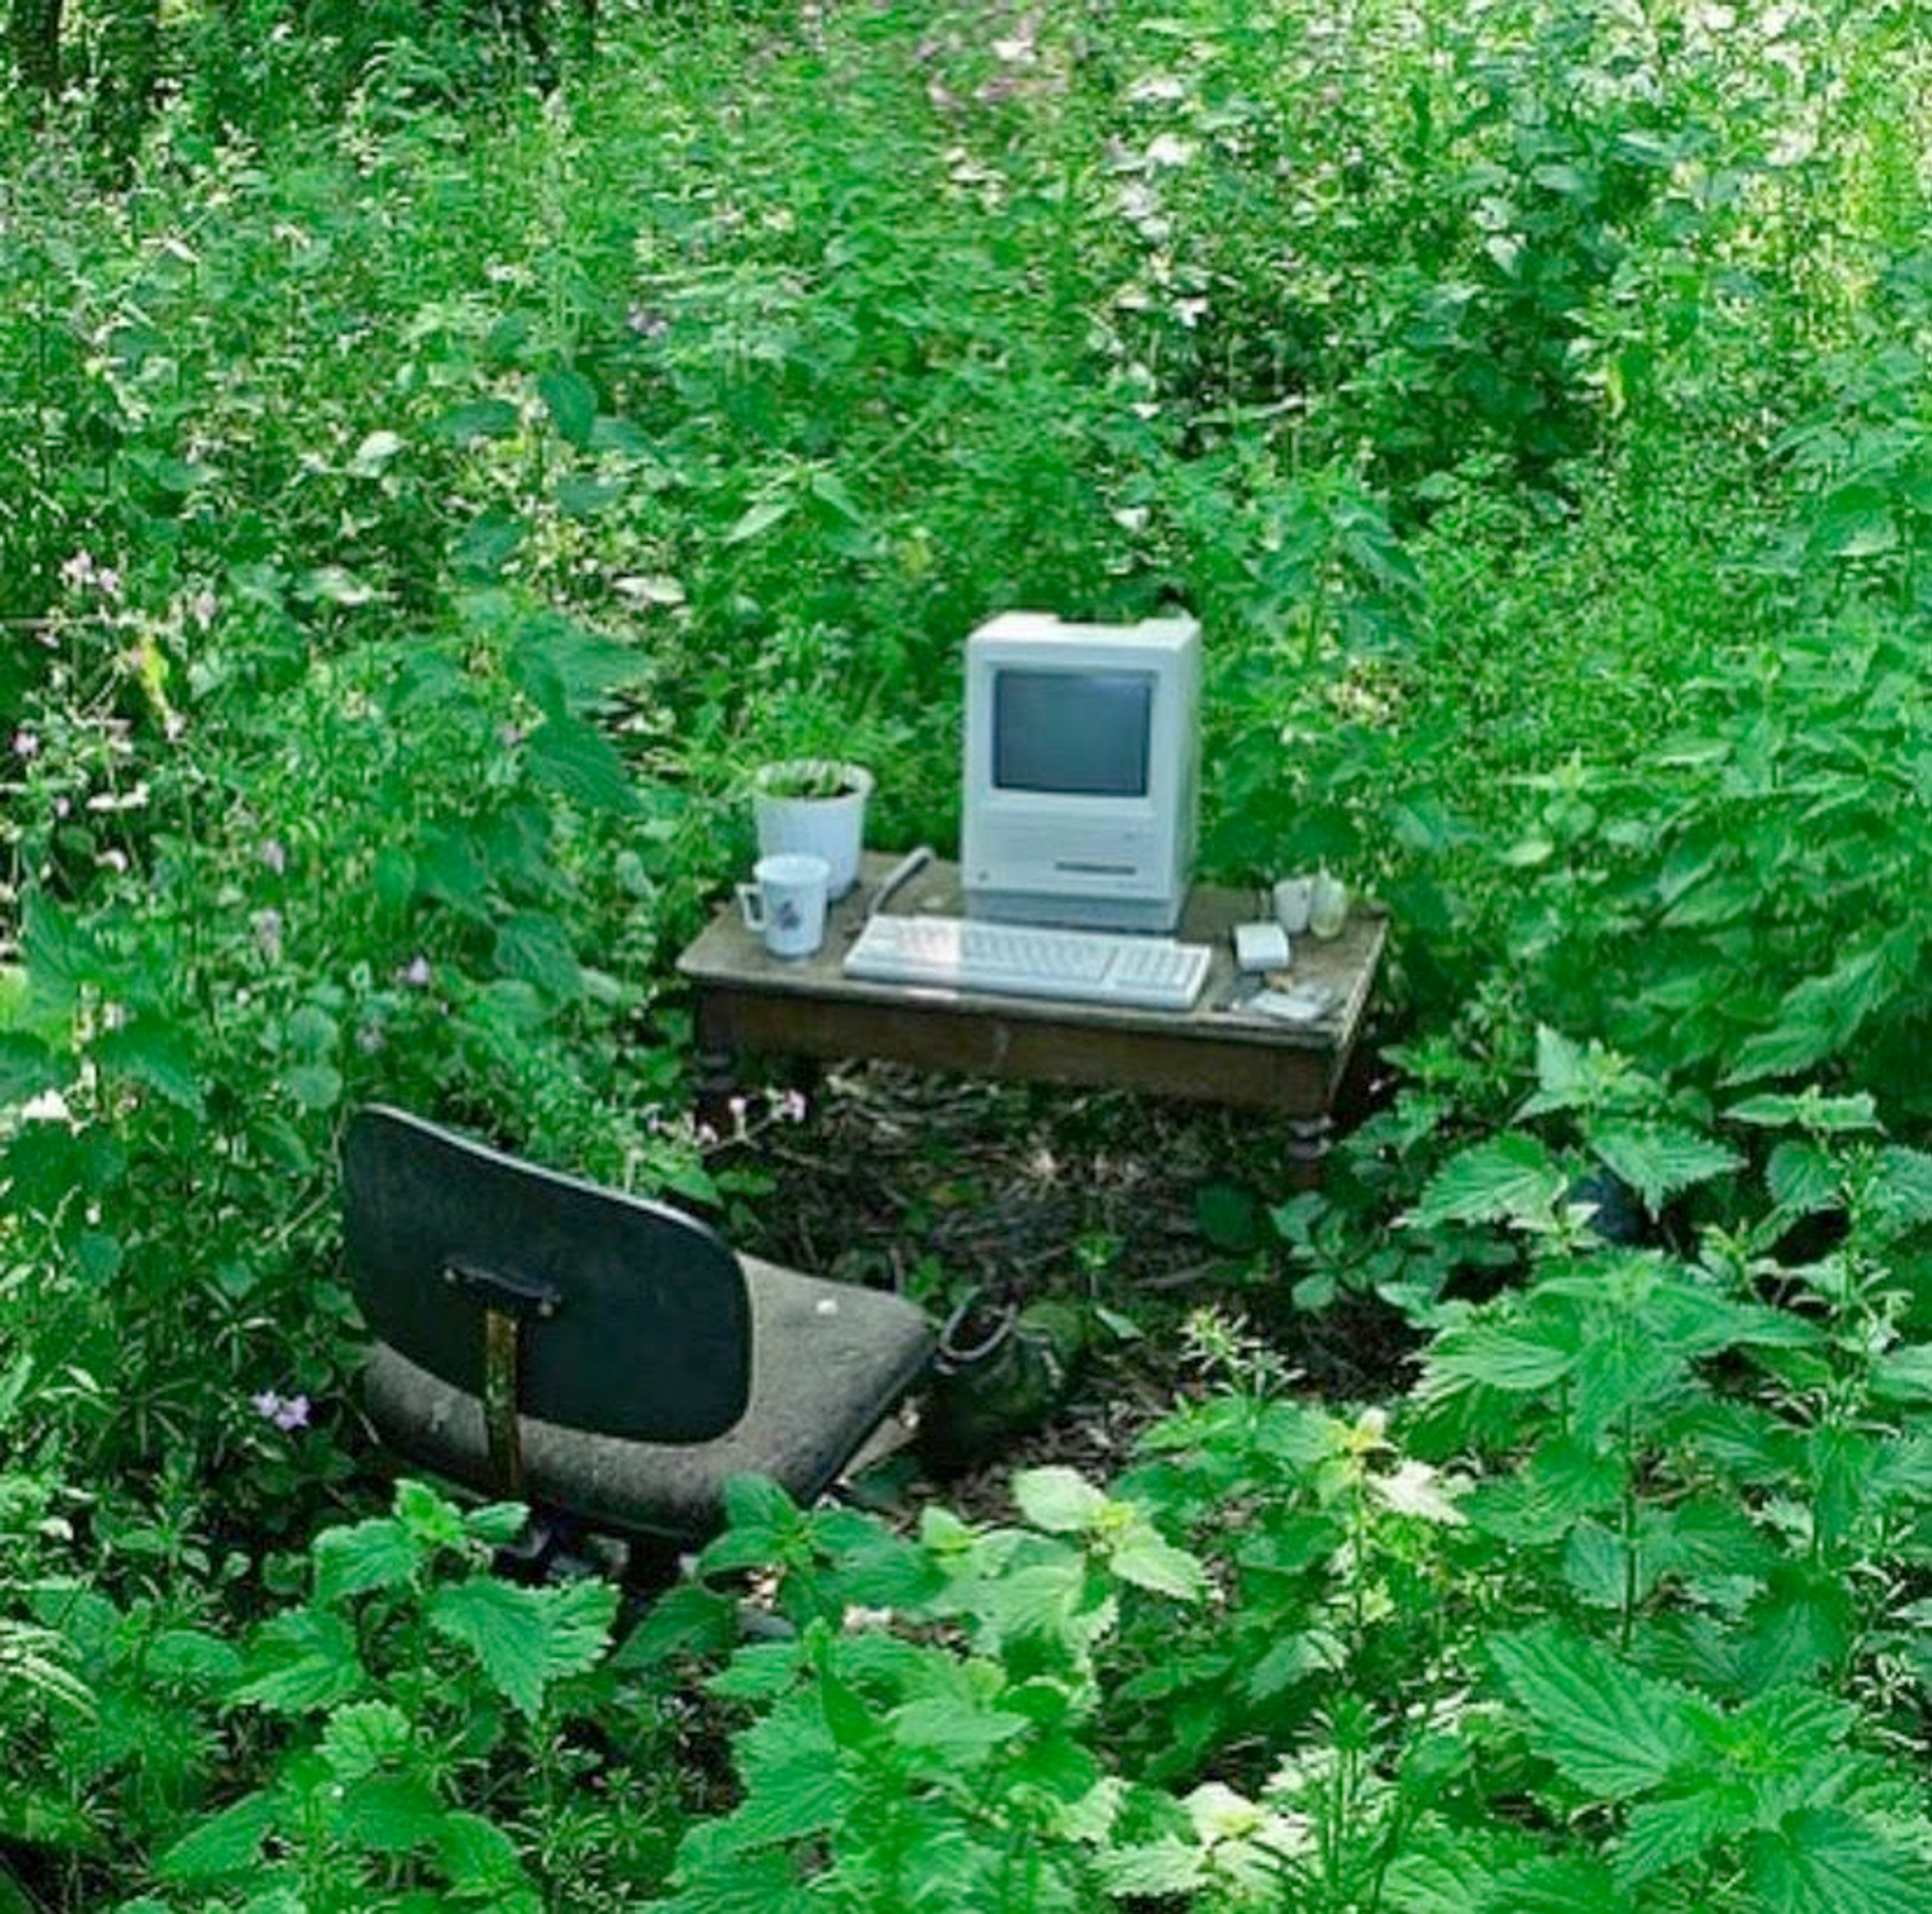 A computer and desk set up in the unkempt wilderness